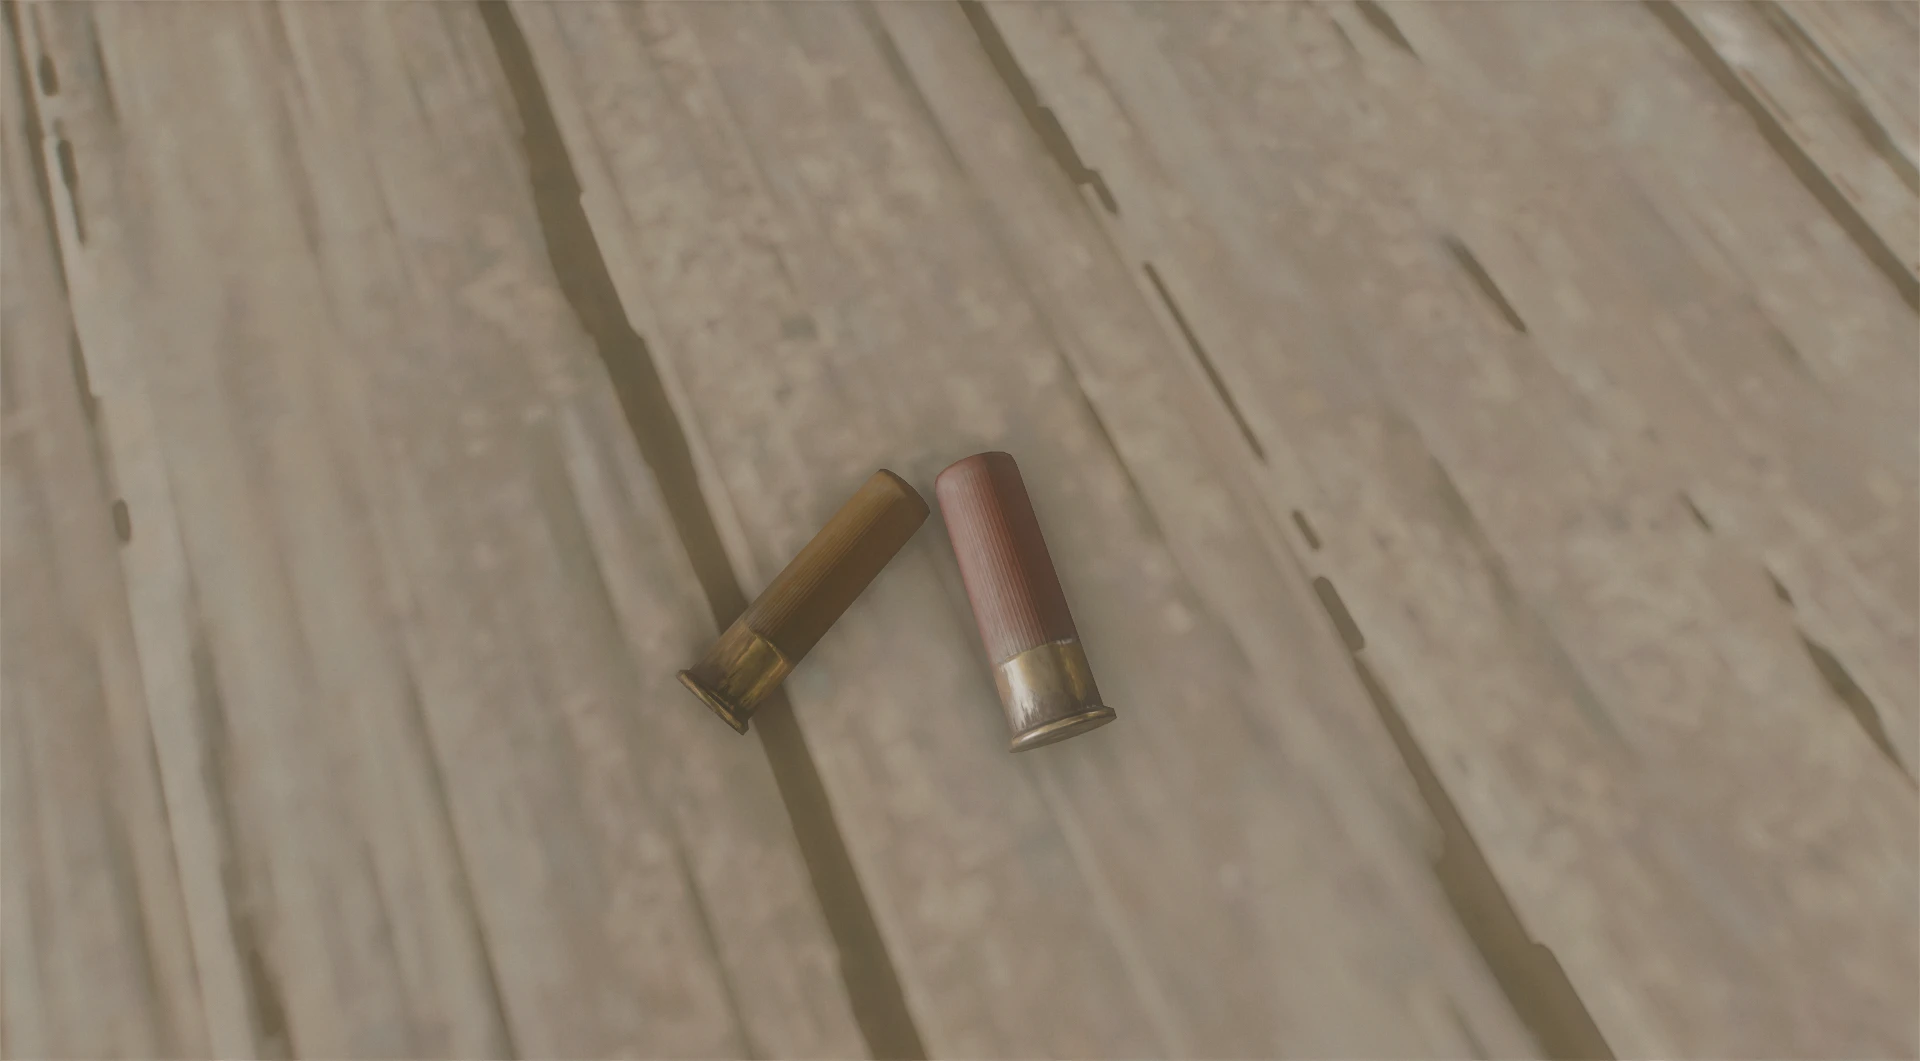 fallout 4 where to find .50 ammo